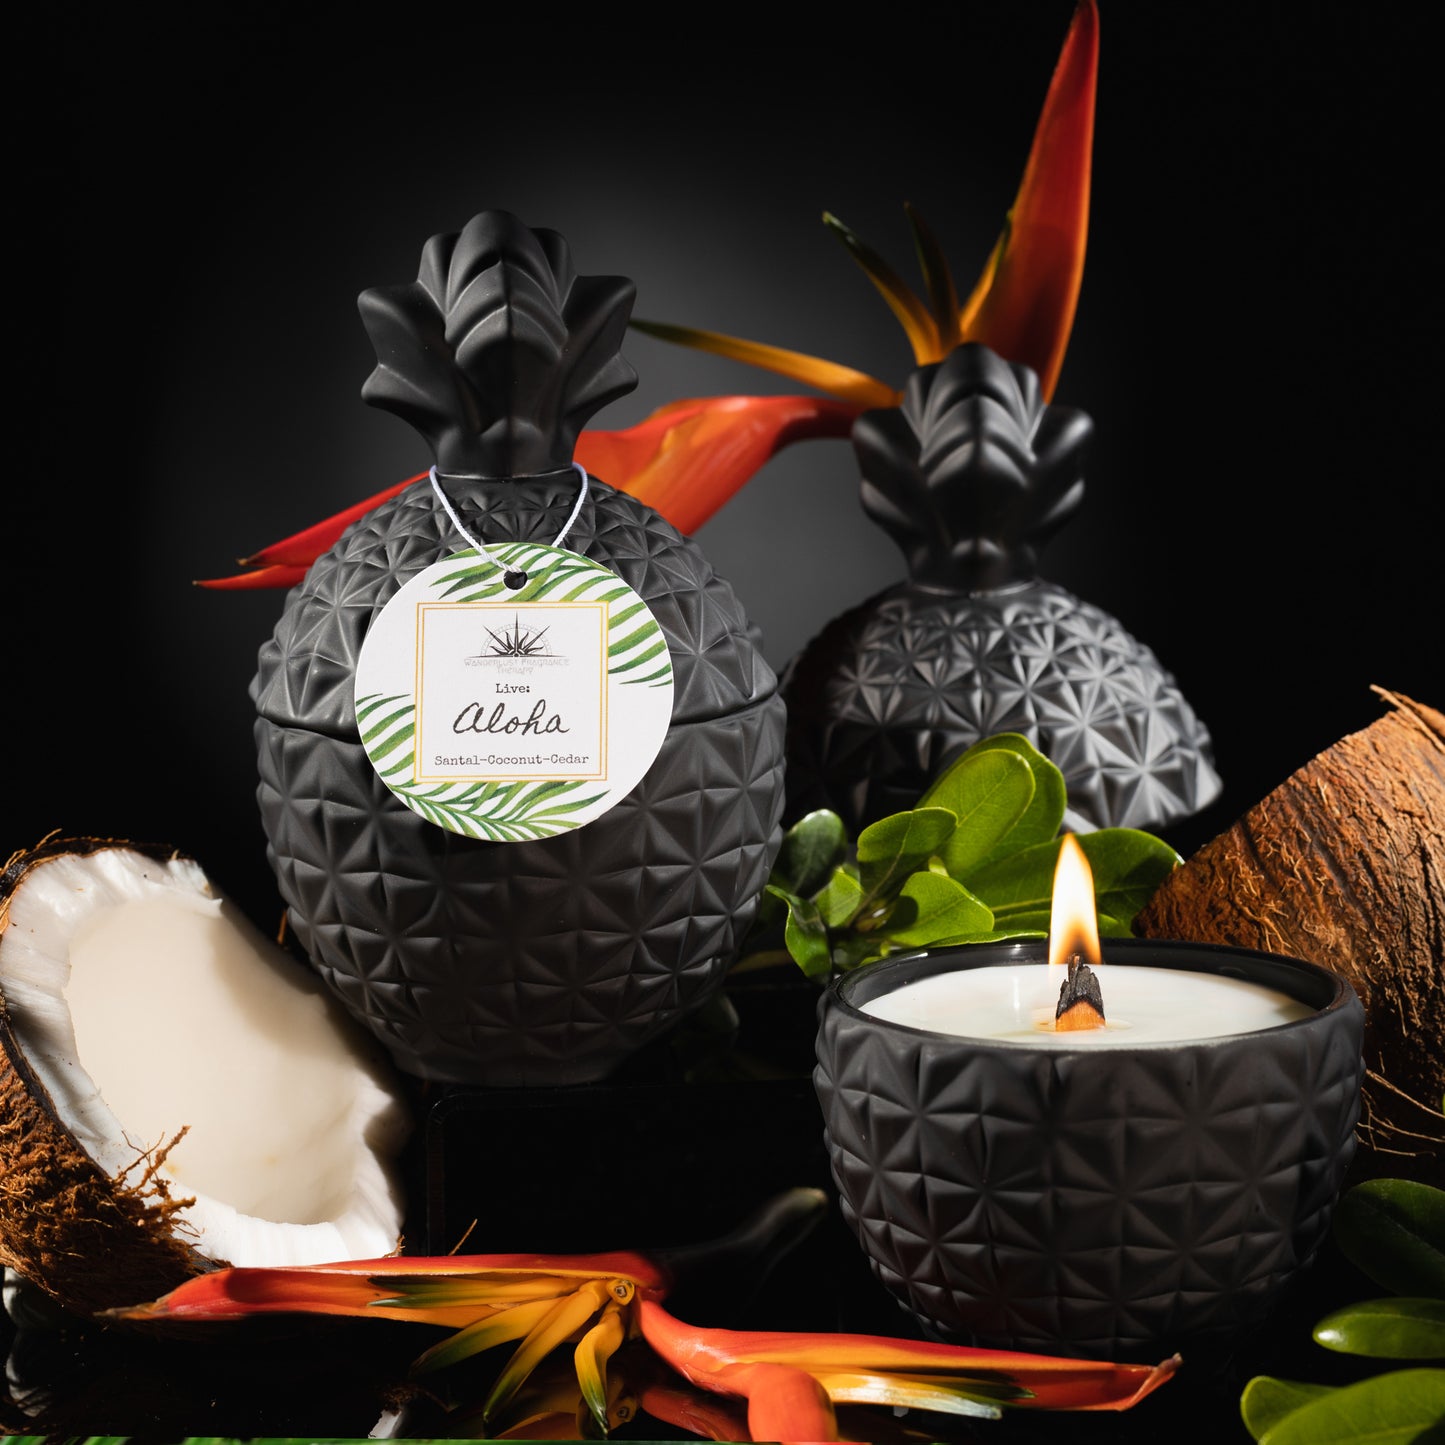 Candle in black pineapple jar scented with coconut, santal and cedar